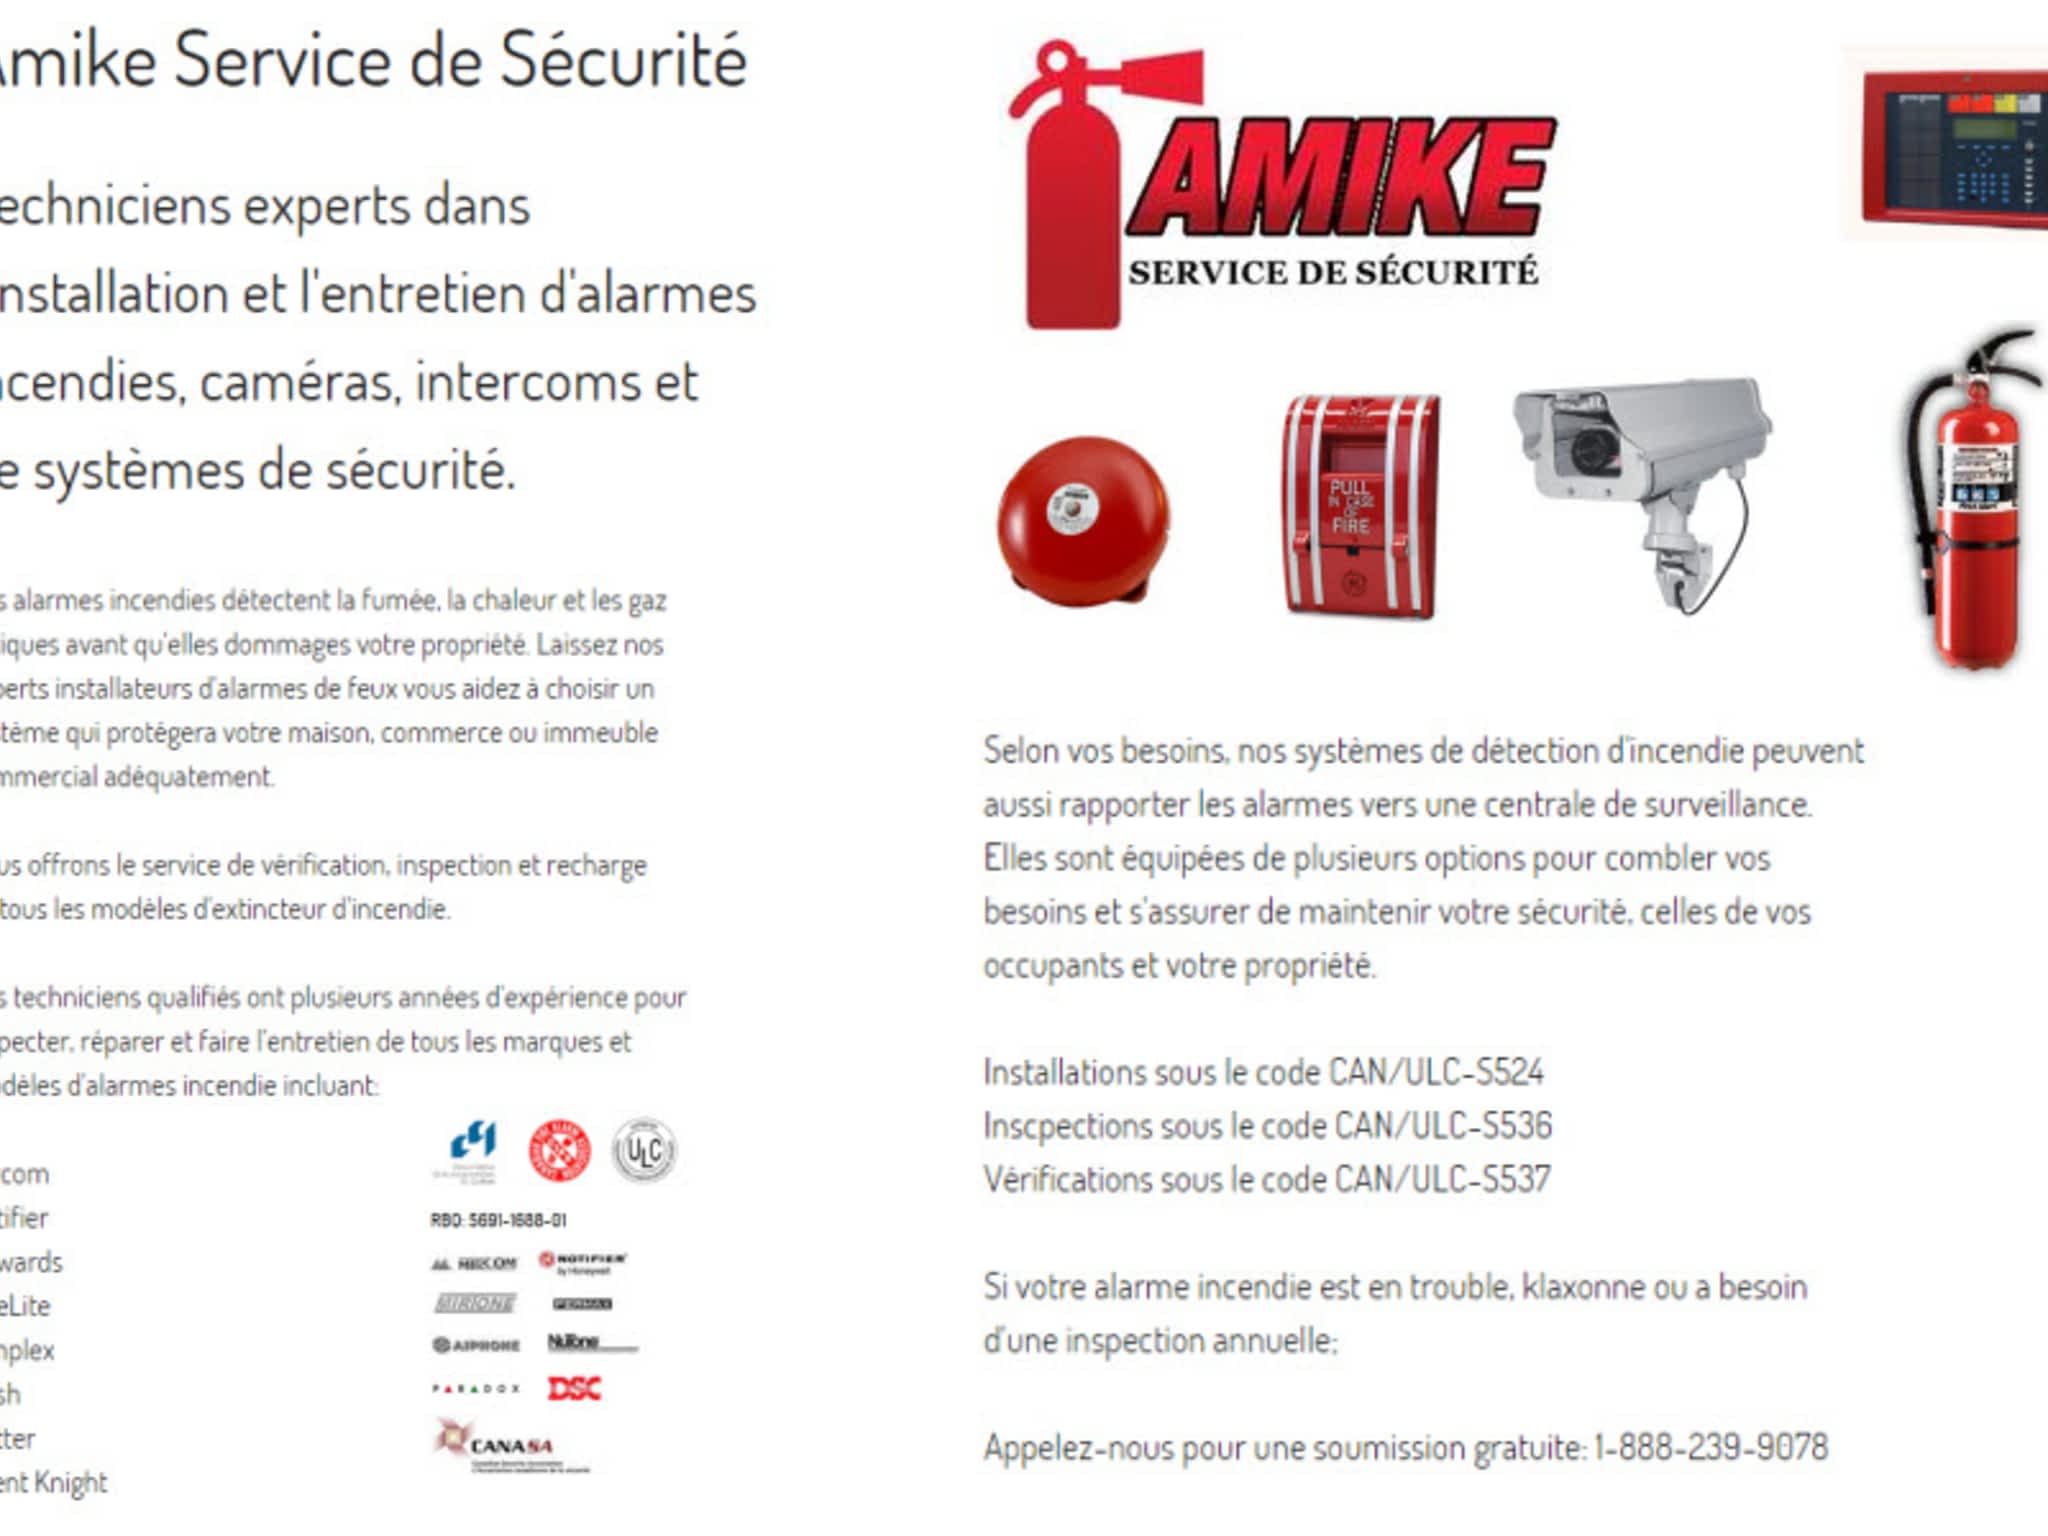 photo Amike Security Services